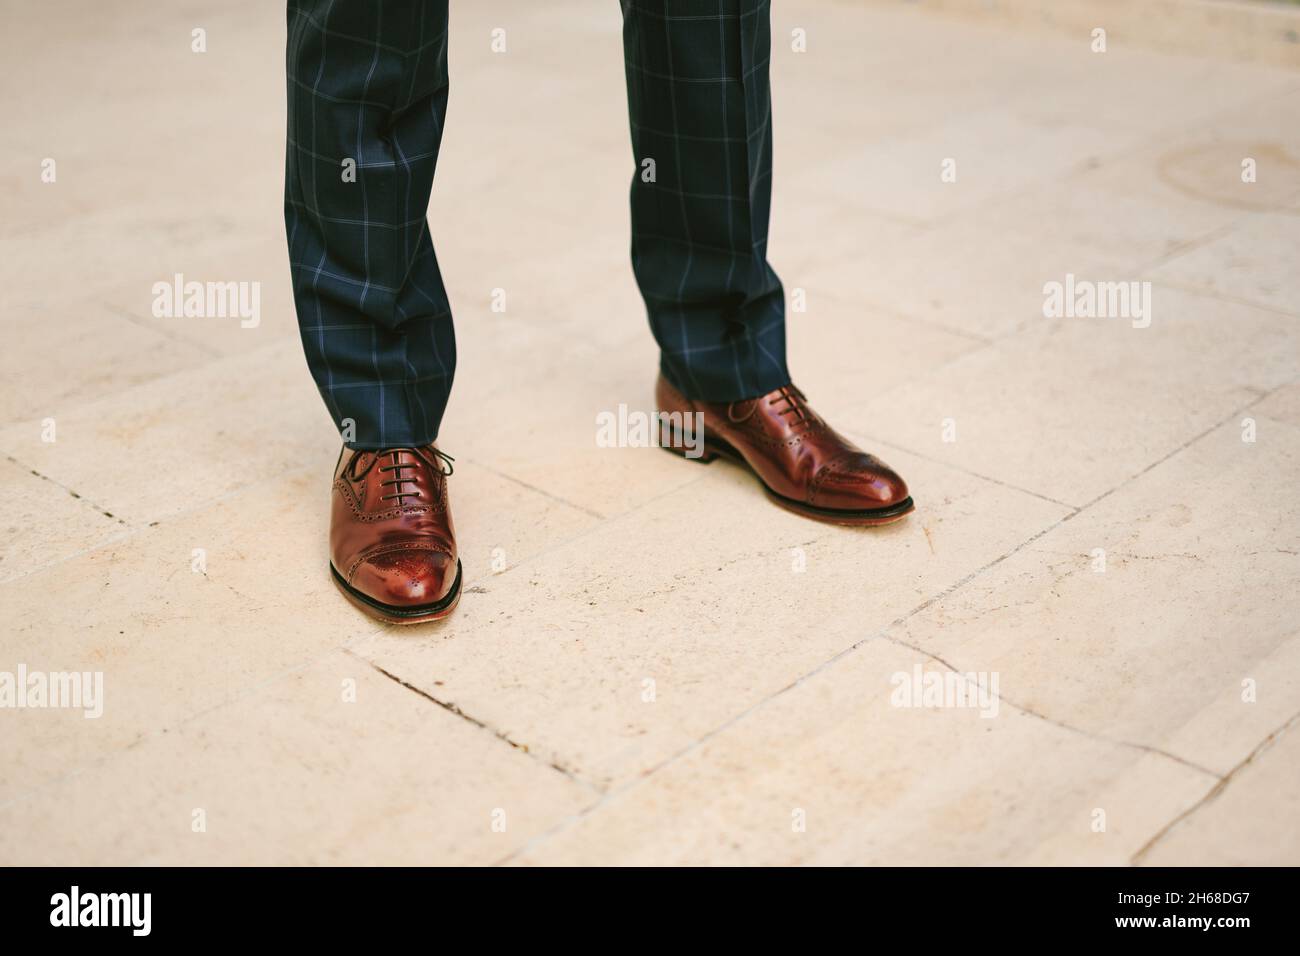 Man in black plaid trousers and brown patent leather shoes stands on a tile floor. Legs close up Stock Photo